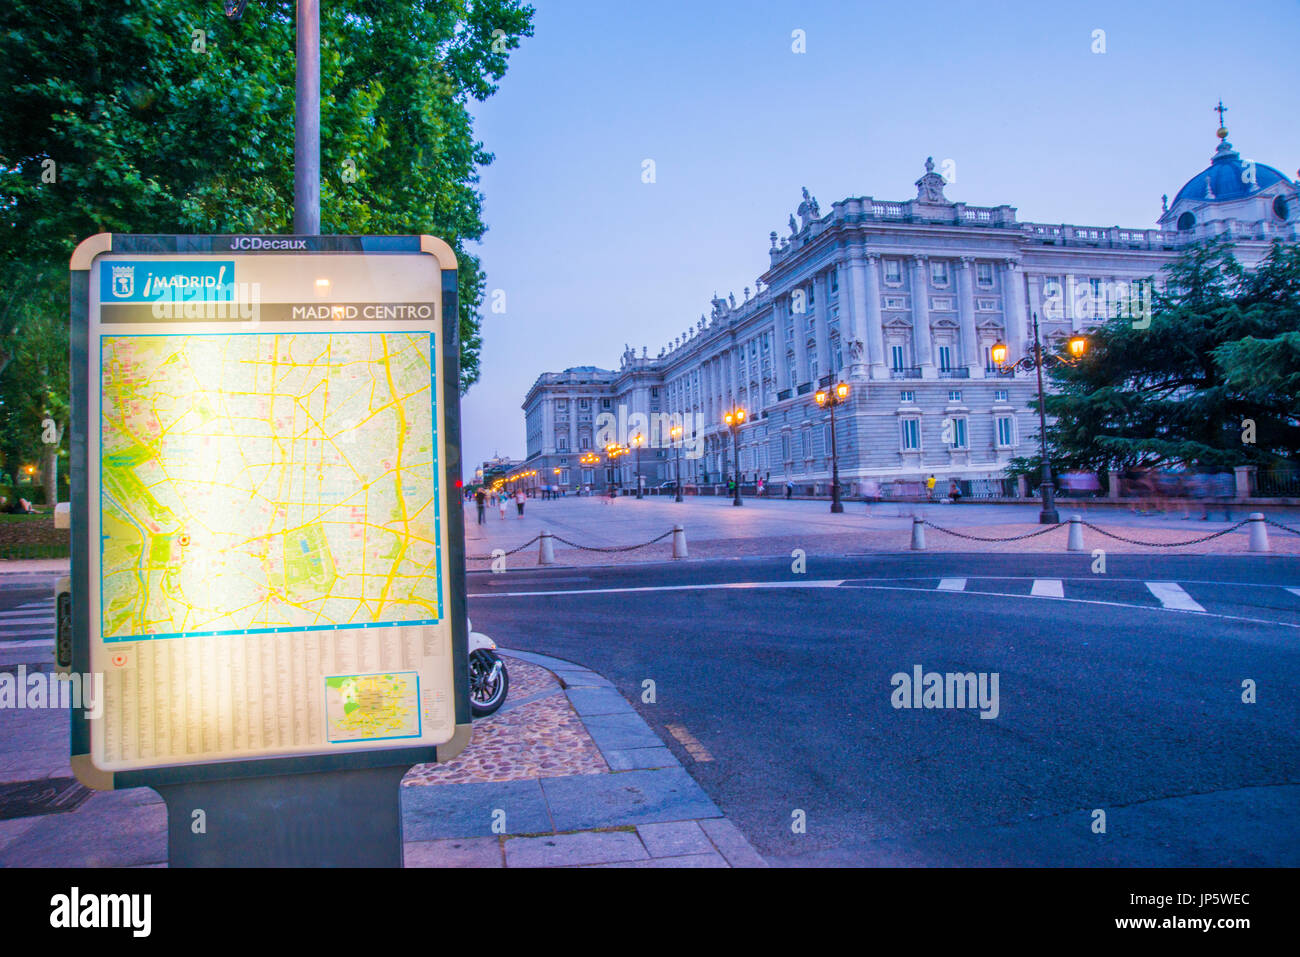 City map and Royal Palace, night view. Bailen street, Madrid, Spain. Stock Photo